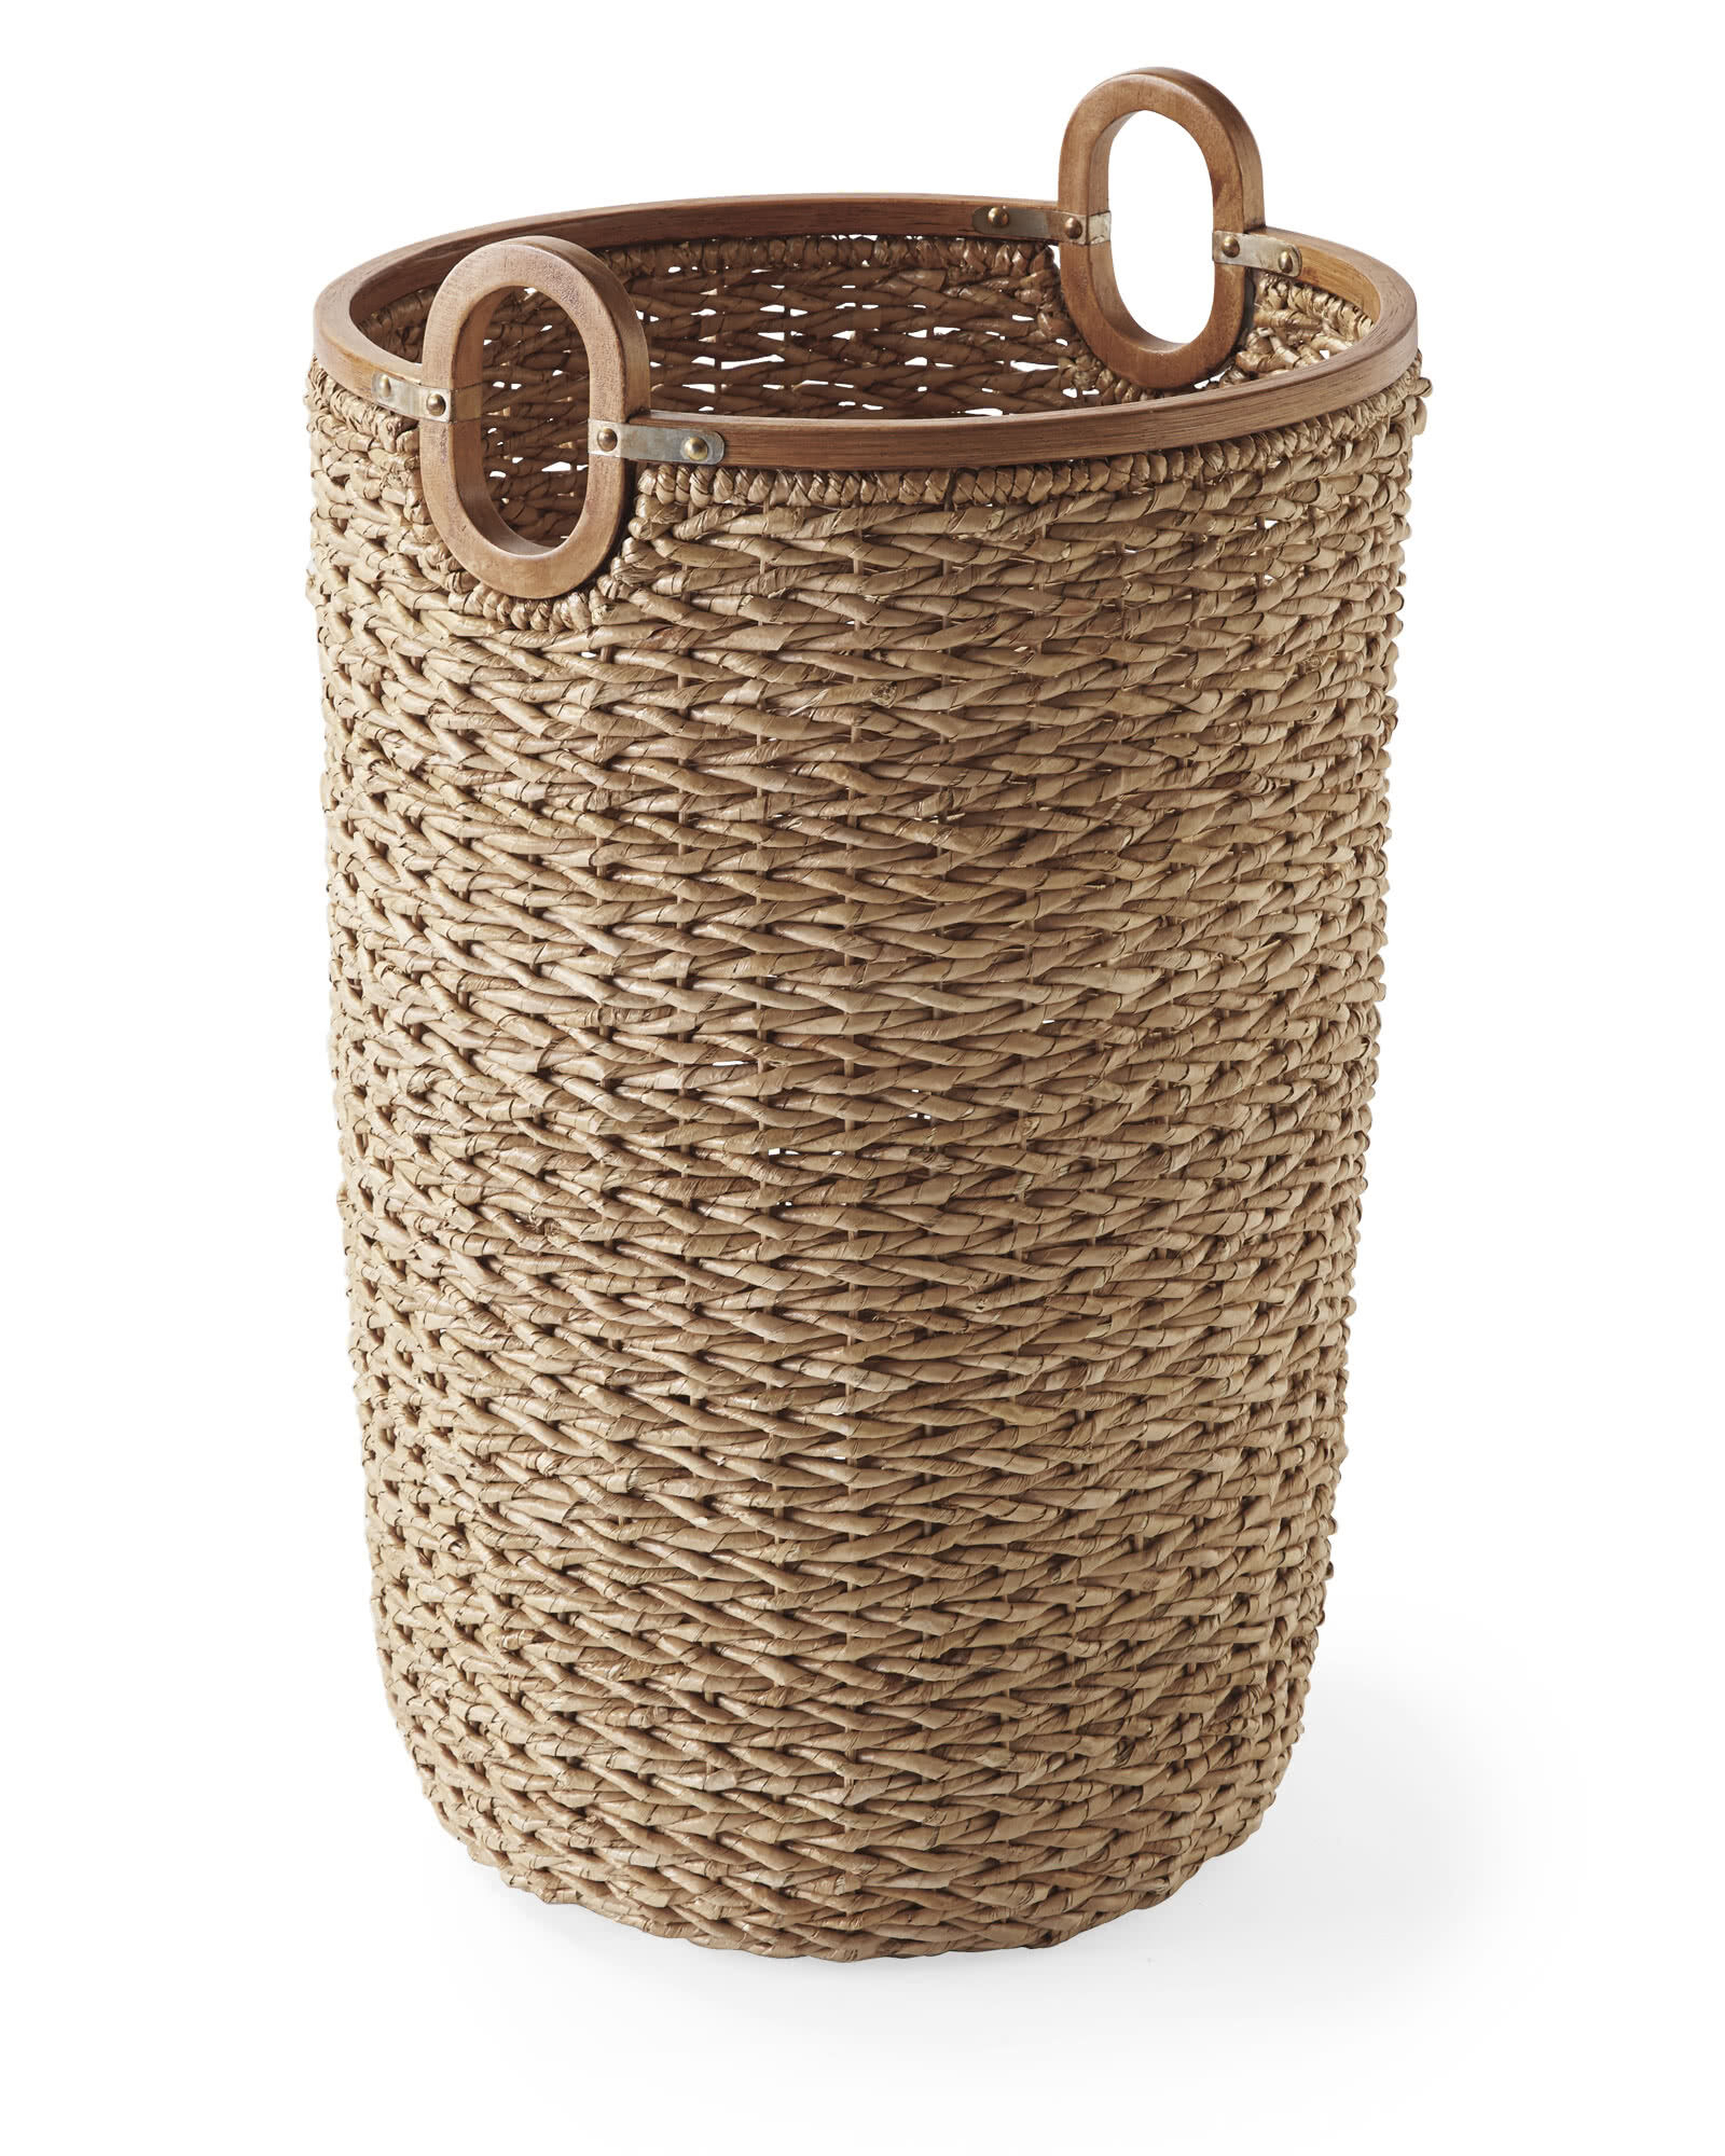 Seagrass Basket - Serena and Lily